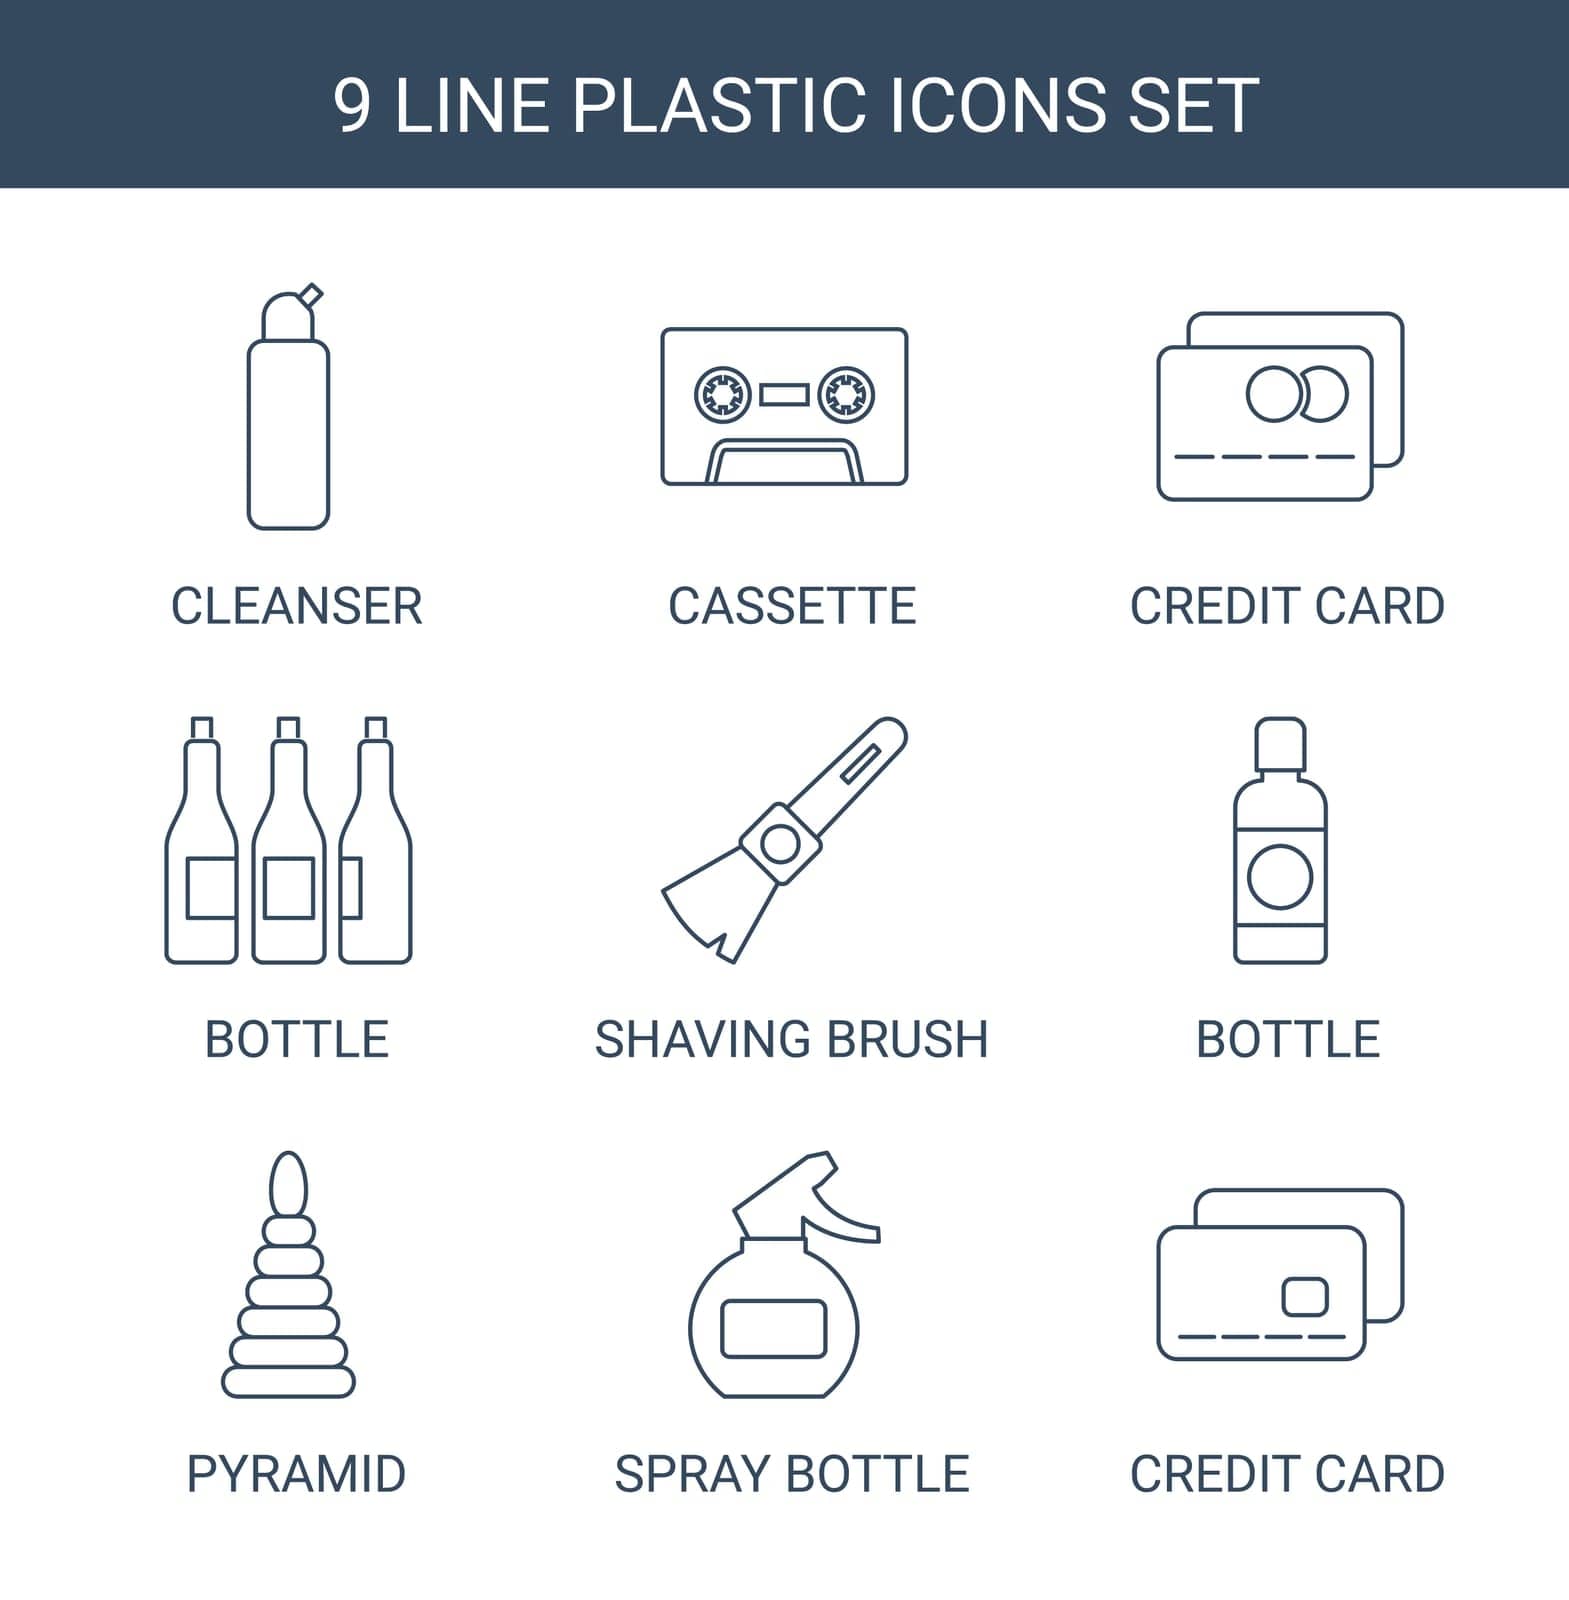 container,symbol,icon,sign,isolated,bottle,cassette,retail,outline,bank,white,design,beverage,payment,vector,credit,debit,cash,graphic,beer,element,brush,glass,set,spray,shape,business,shaving,clean,water,drink,cleanser,plastic,liquid,background,vintage,silhouette,pyramid,illustration,card,object by ogqcorp